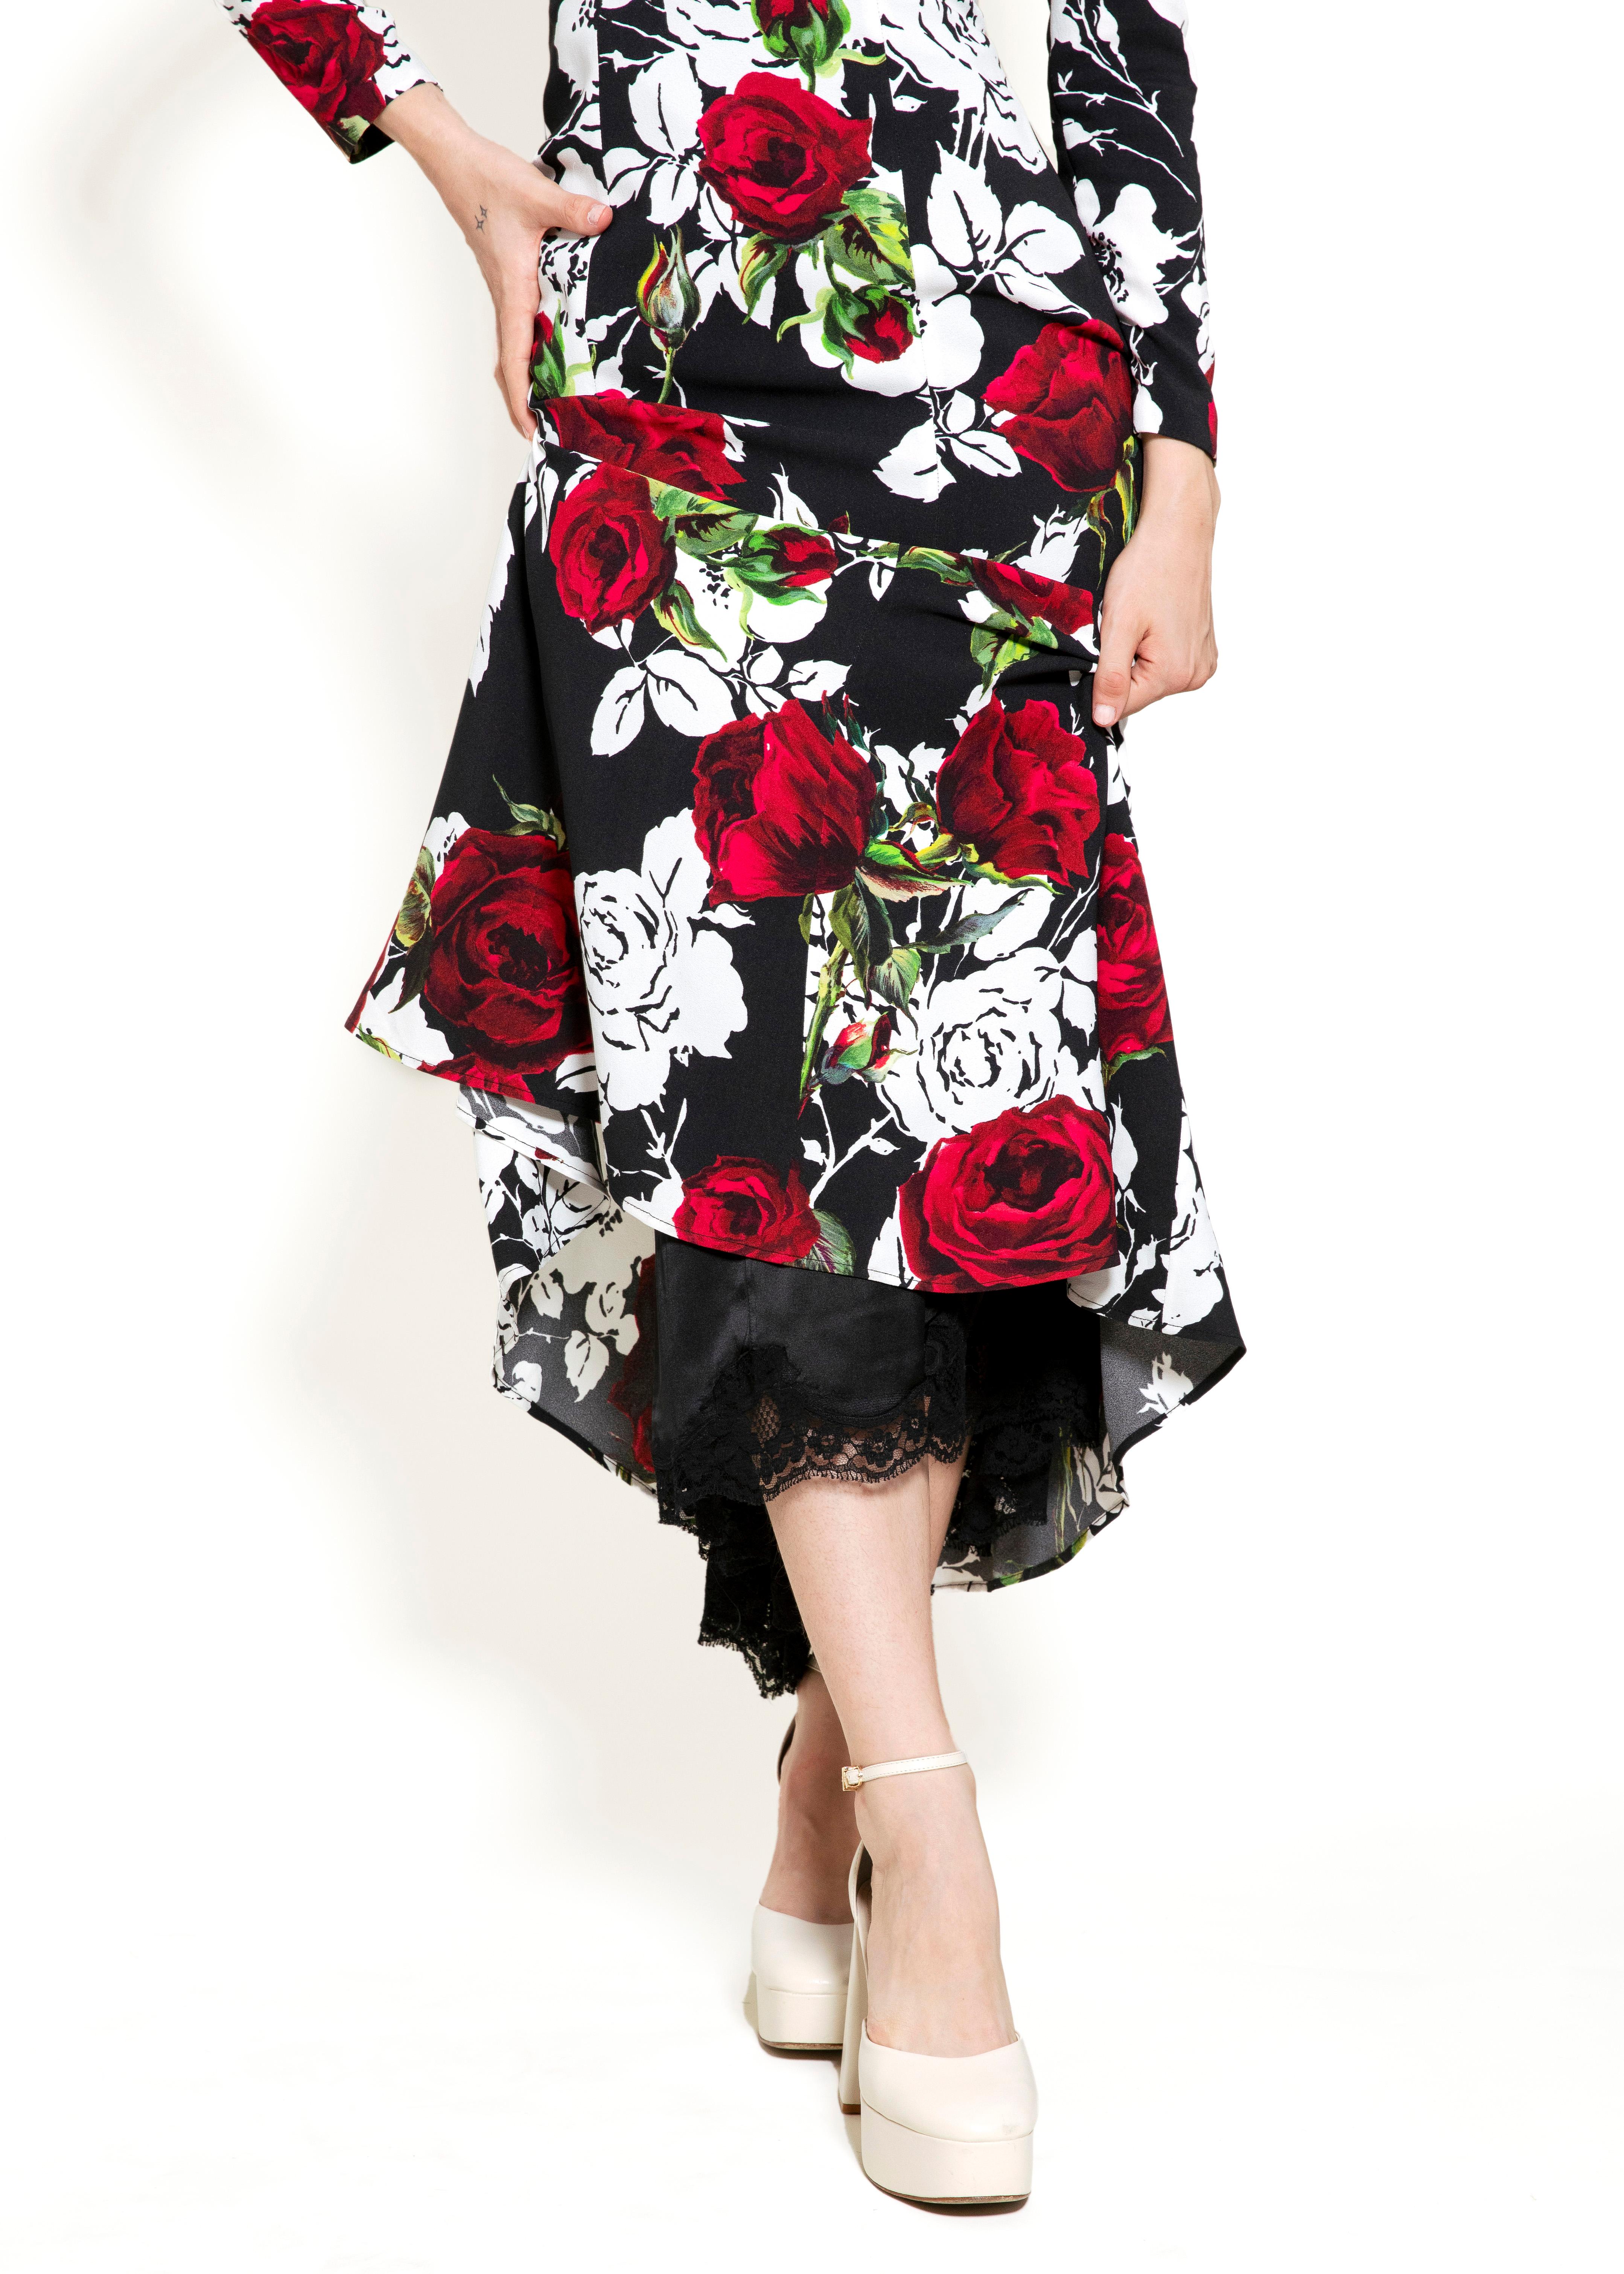 Dolce & Gabbana Fall 2015 L/S Floral Dress For Sale 2